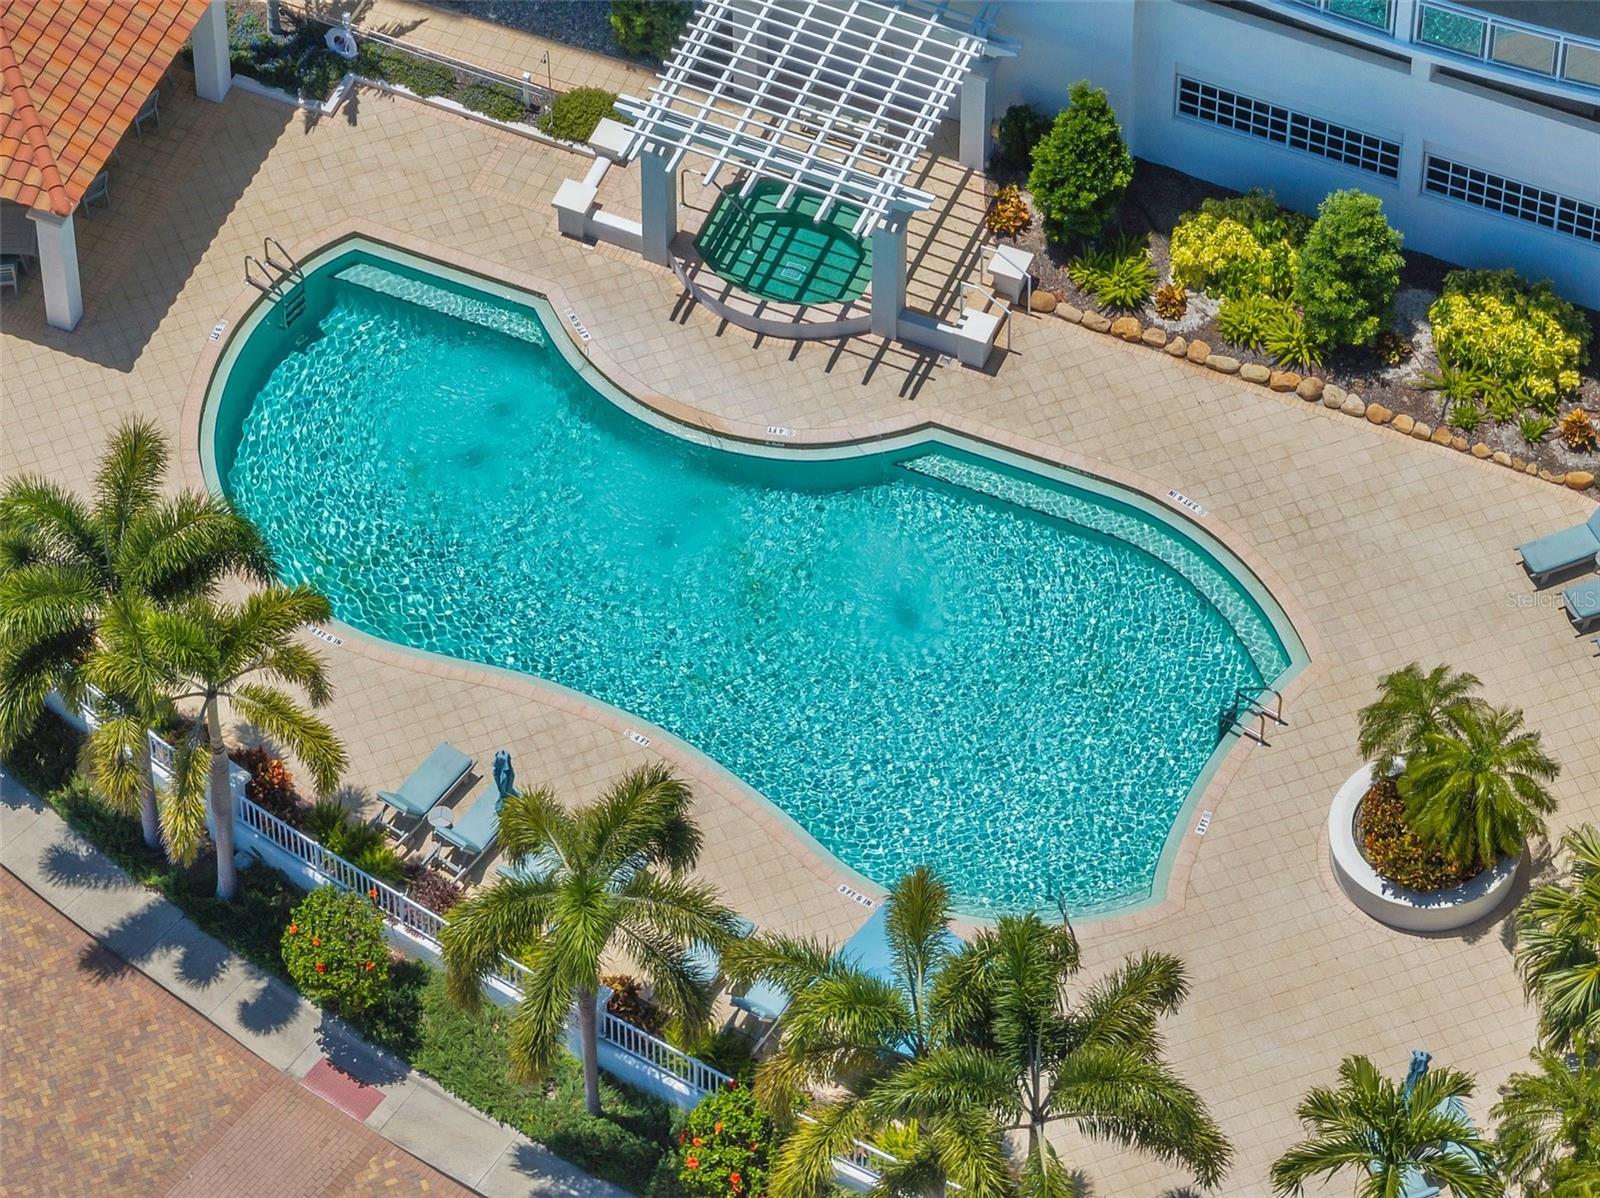 Drone view of pool, inviting and ready to enjoy!